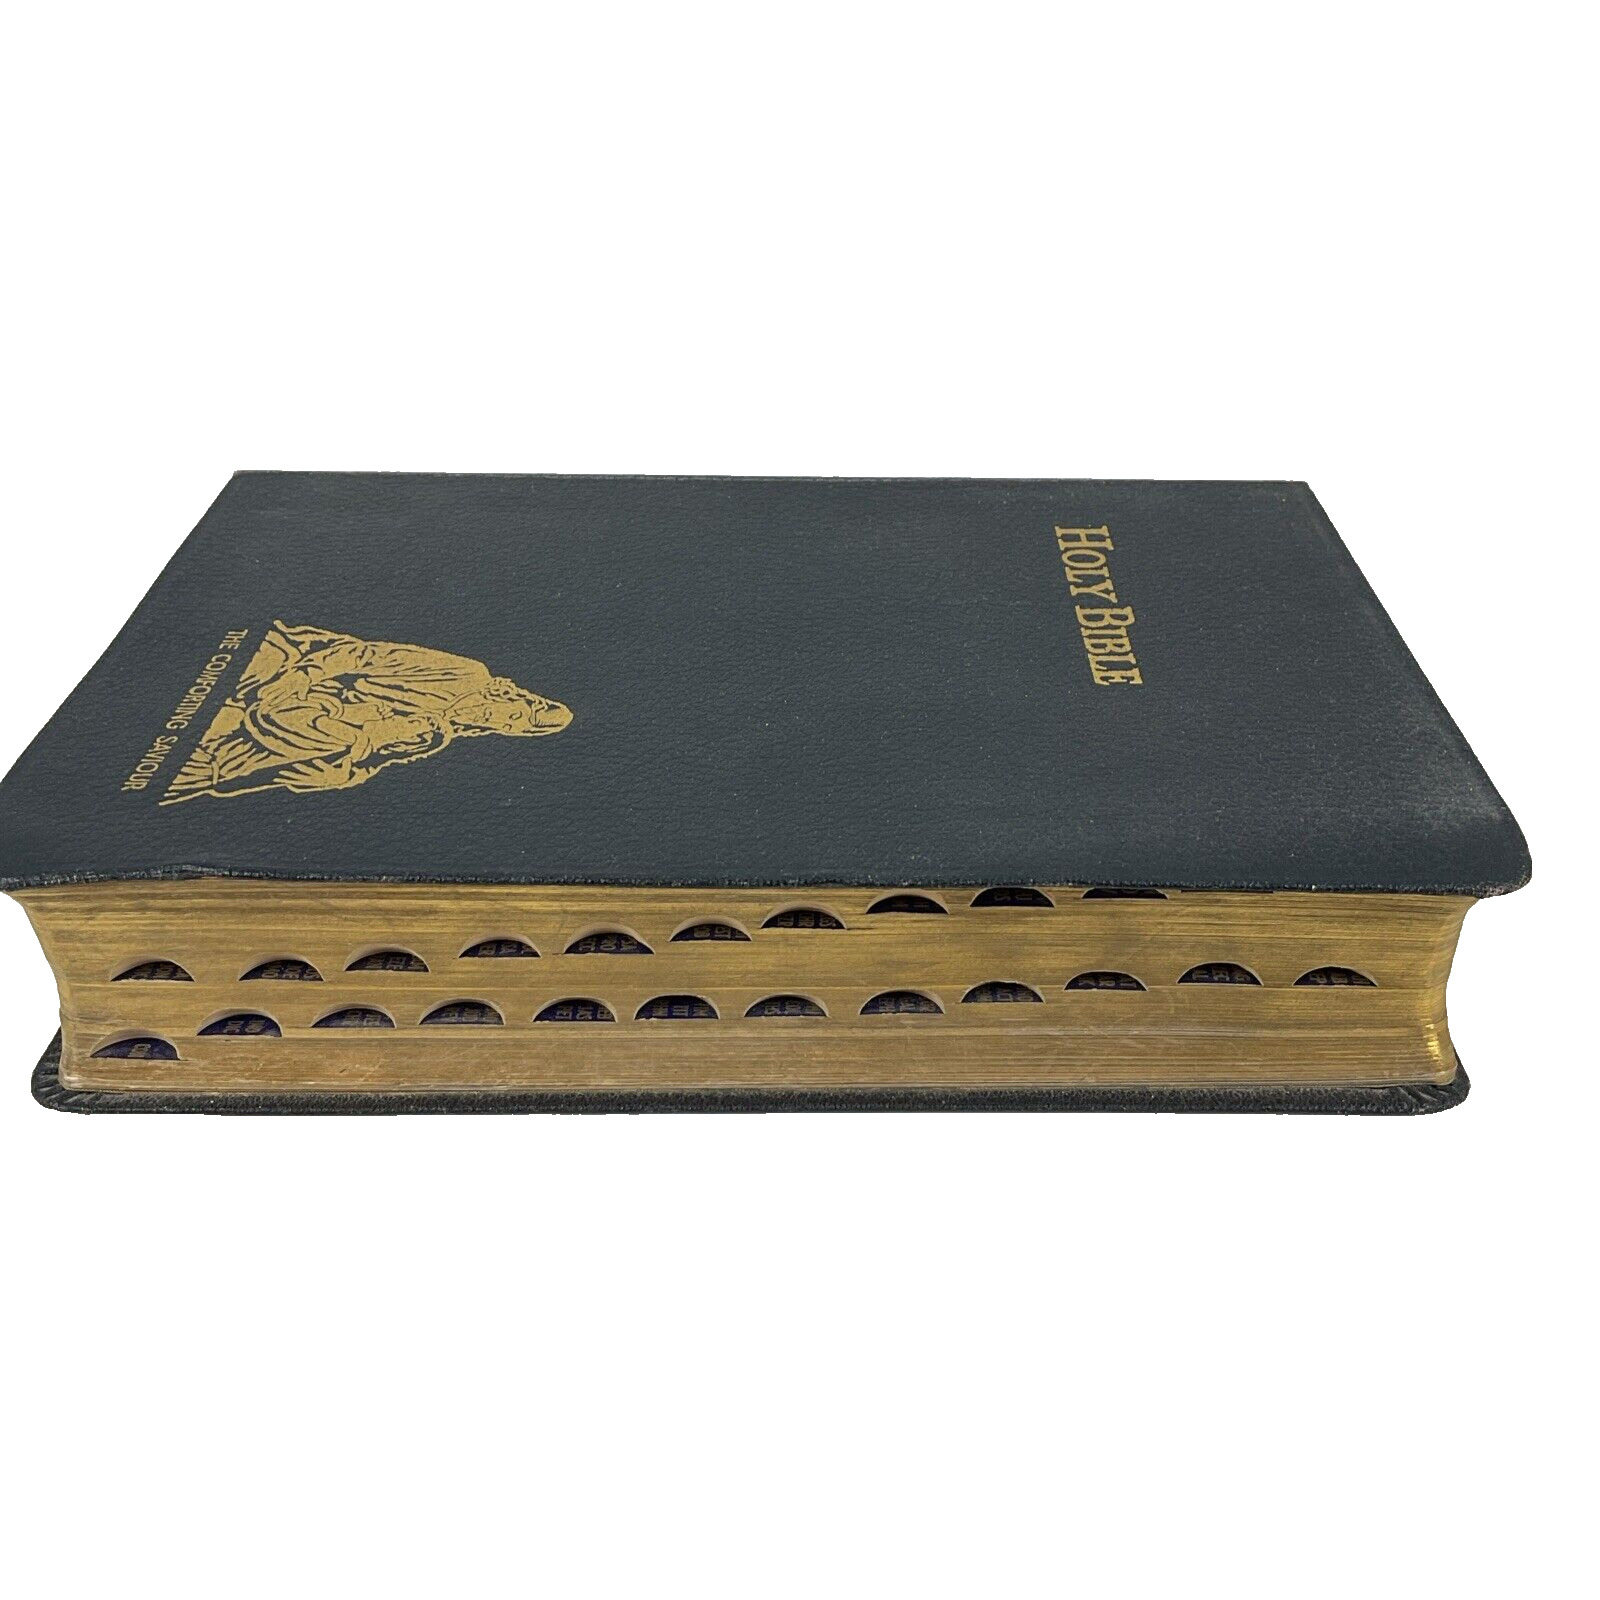 Bible King James Version Family Alter Edition 1949 Black Leather Bound